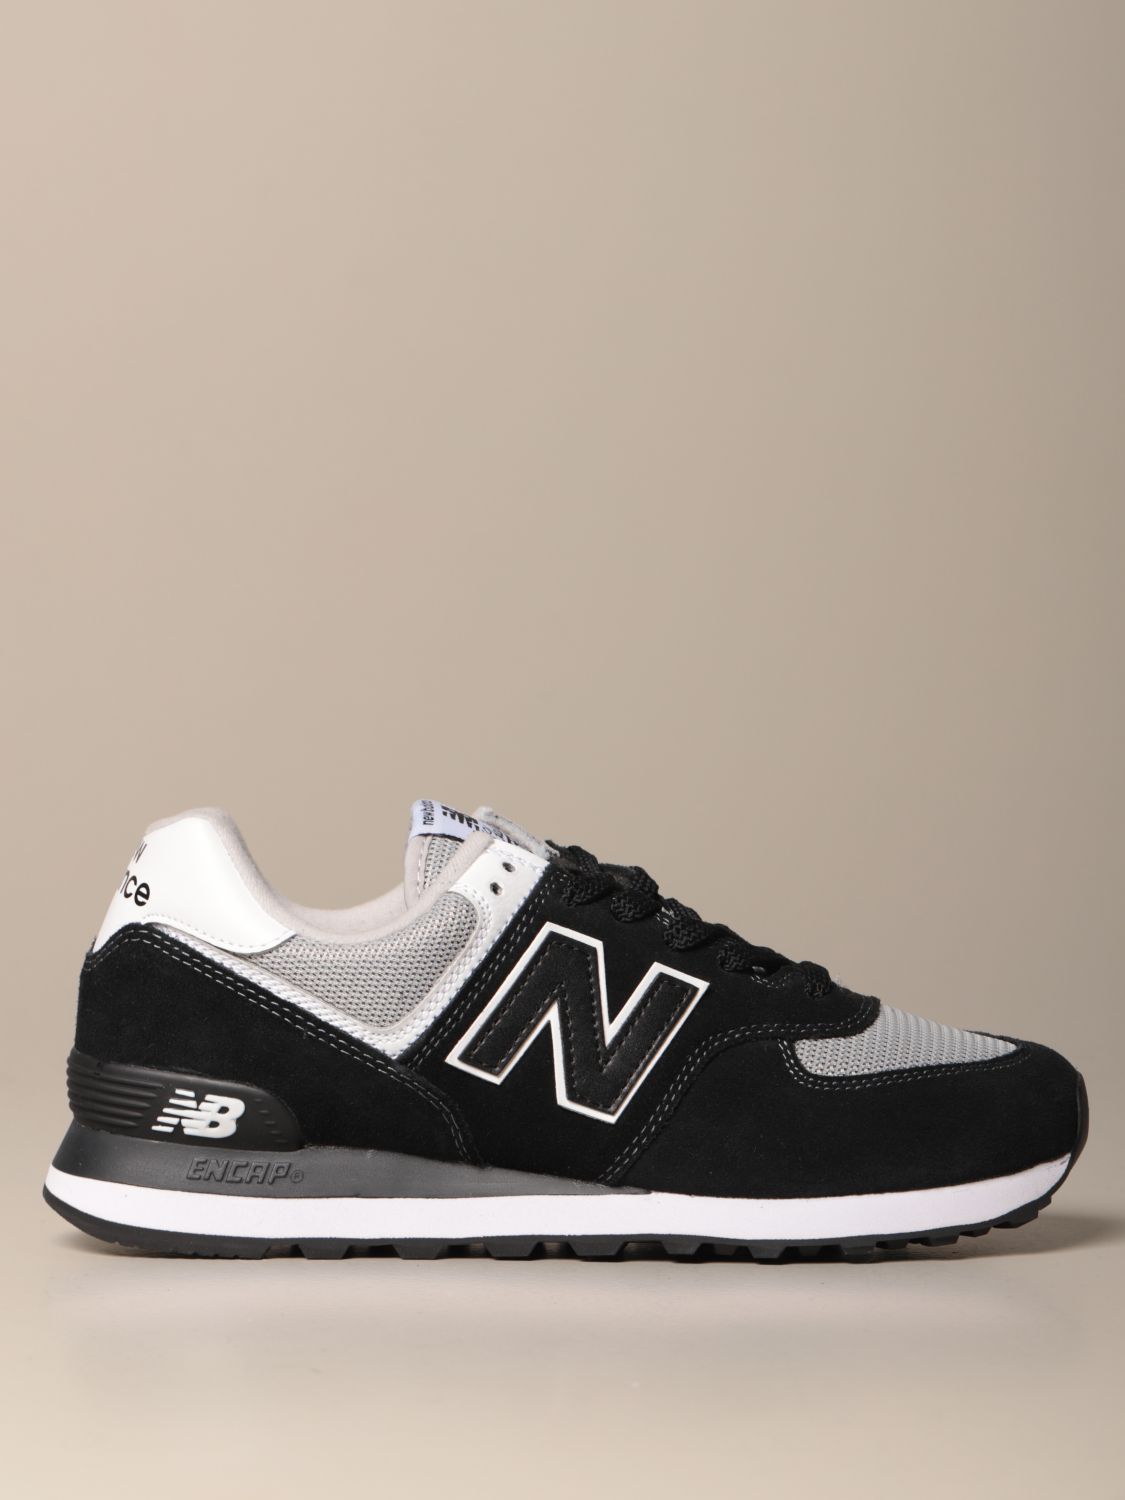 574 New Balance sneakers in suede and mesh اسئلة ون بيس